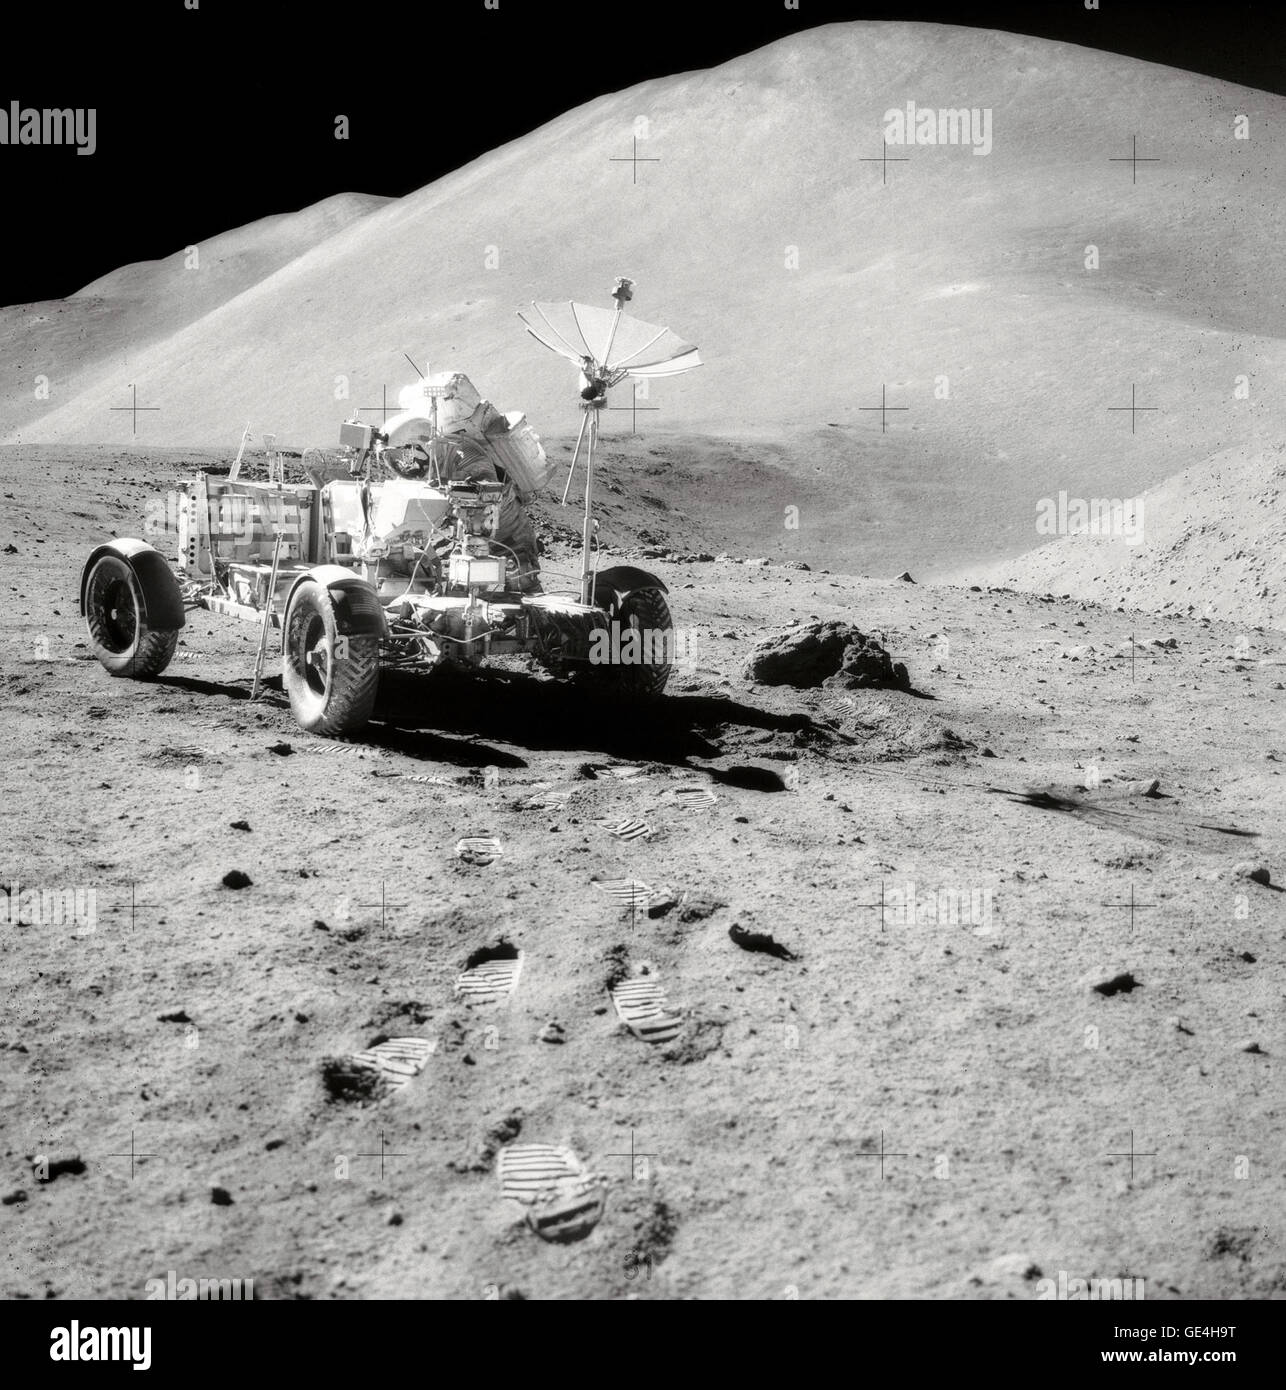 David R. Scott, Commander of Apollo 15, works at the Lunar Roving Vehicle (LRV) during the third lunar surface extravehicular activity (EVA) of the mission at the Hadley-Apennine landing site. Hadley Rille is at the right center of the picture. Hadley Delta, in the background, rises approximately 4,000 meters (about 13,124 feet) above the plain. St. George Crater is partially visible at the upper right edge. This photograph was taken by Lunar Module pilot James B. Irwin. This view is looking almost due South.   Image # : AS15-82-11121 Stock Photo